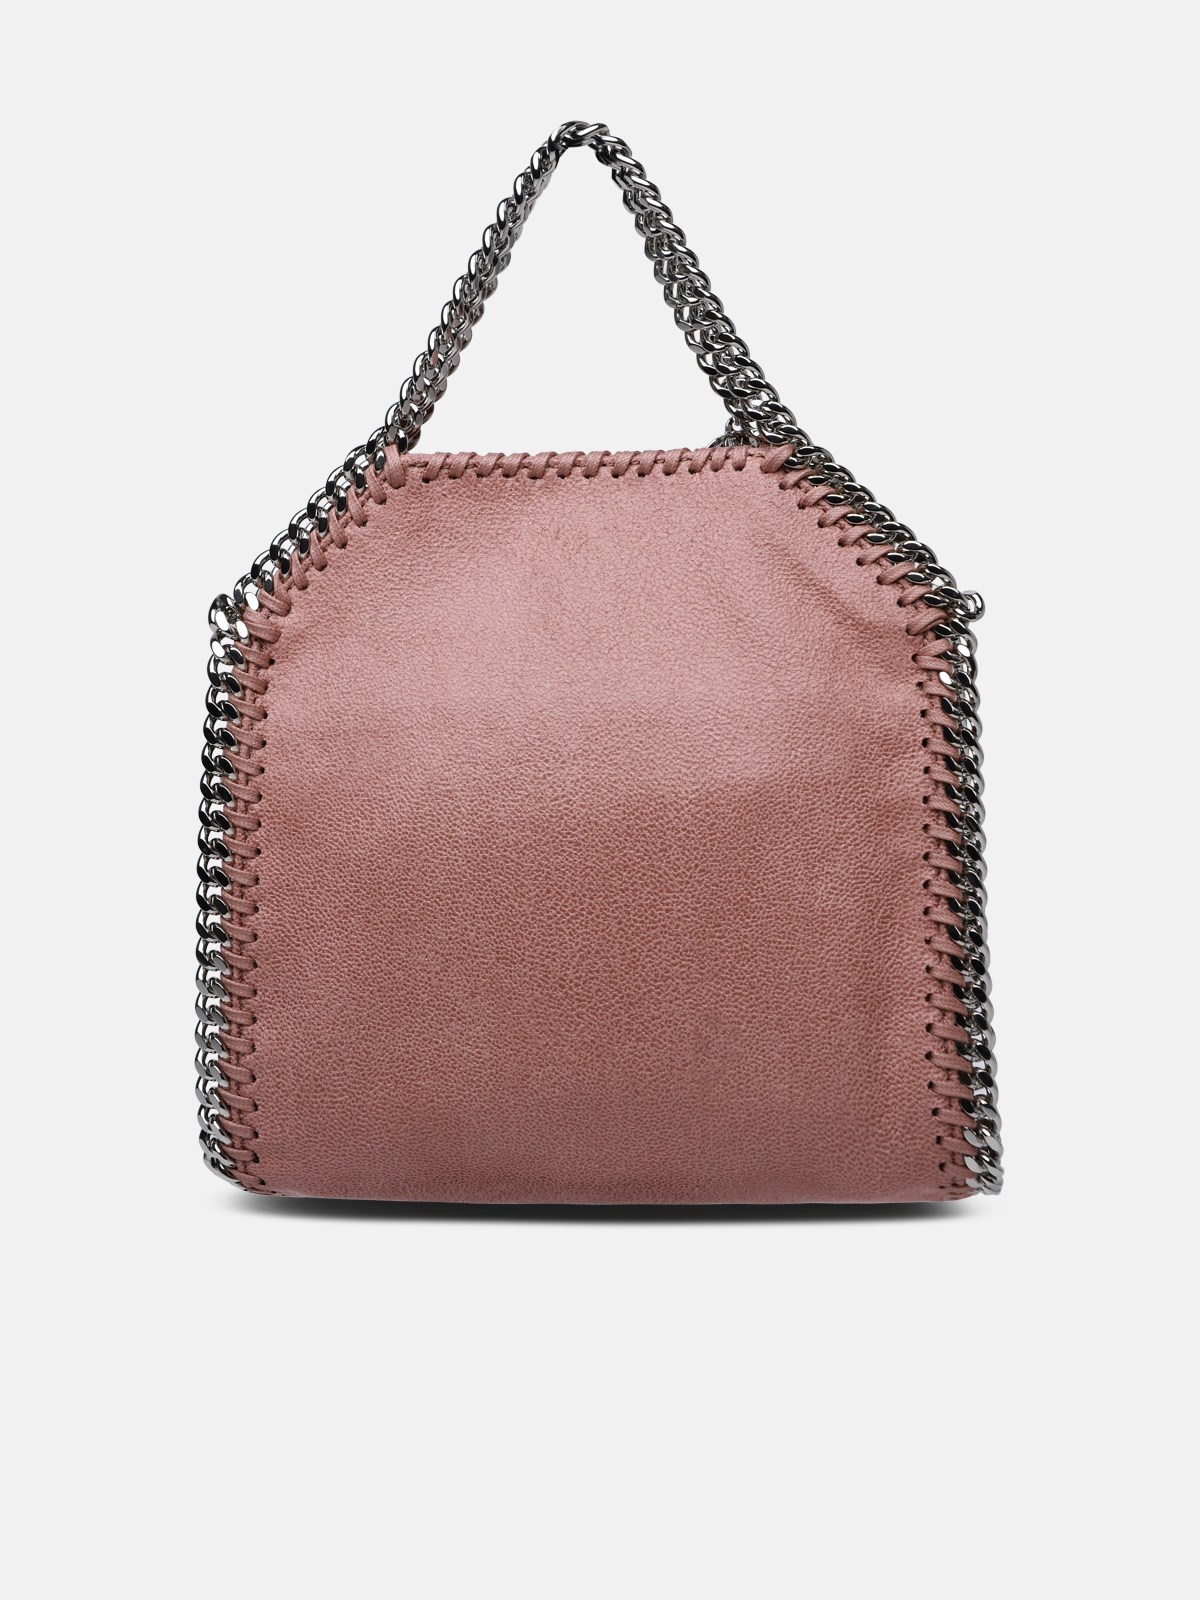 TINY 'FALABELLA' TOTE BAG IN PINK RECYCLED POLYESTER BLEND - 3